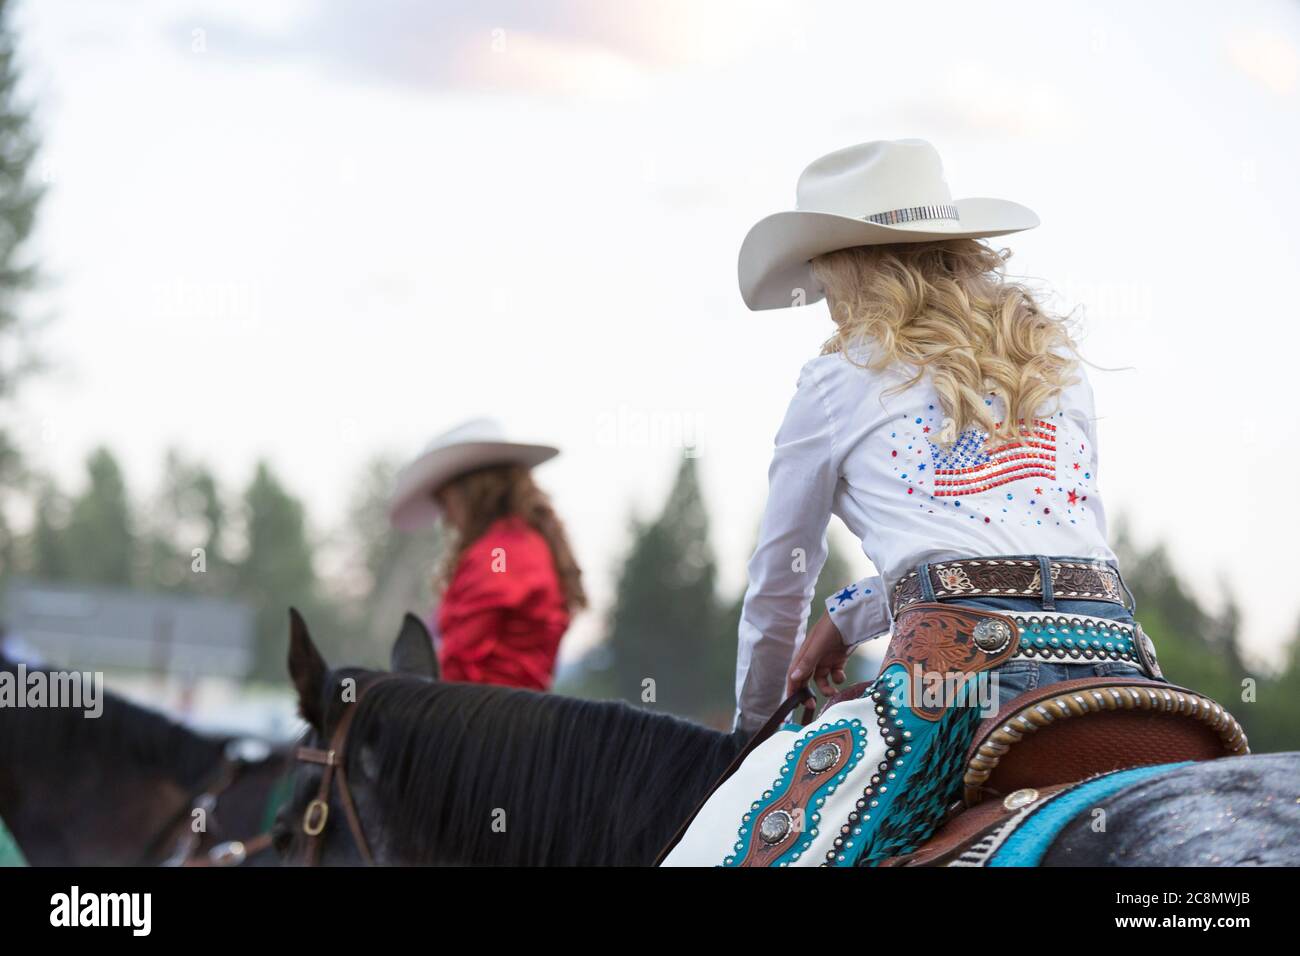 Miss last Chance Rodeo Queen Cassie Turner (right) and Darby Rodeo Queen Abby Riska bow their heads durning a moment of silence at the Kootenai River Stampede in Libby, Montana on Friday, July 24, 2020. The annual rodeo was held with additional safety measures in place due to rising cases of COVID-19 in the state. Stock Photo